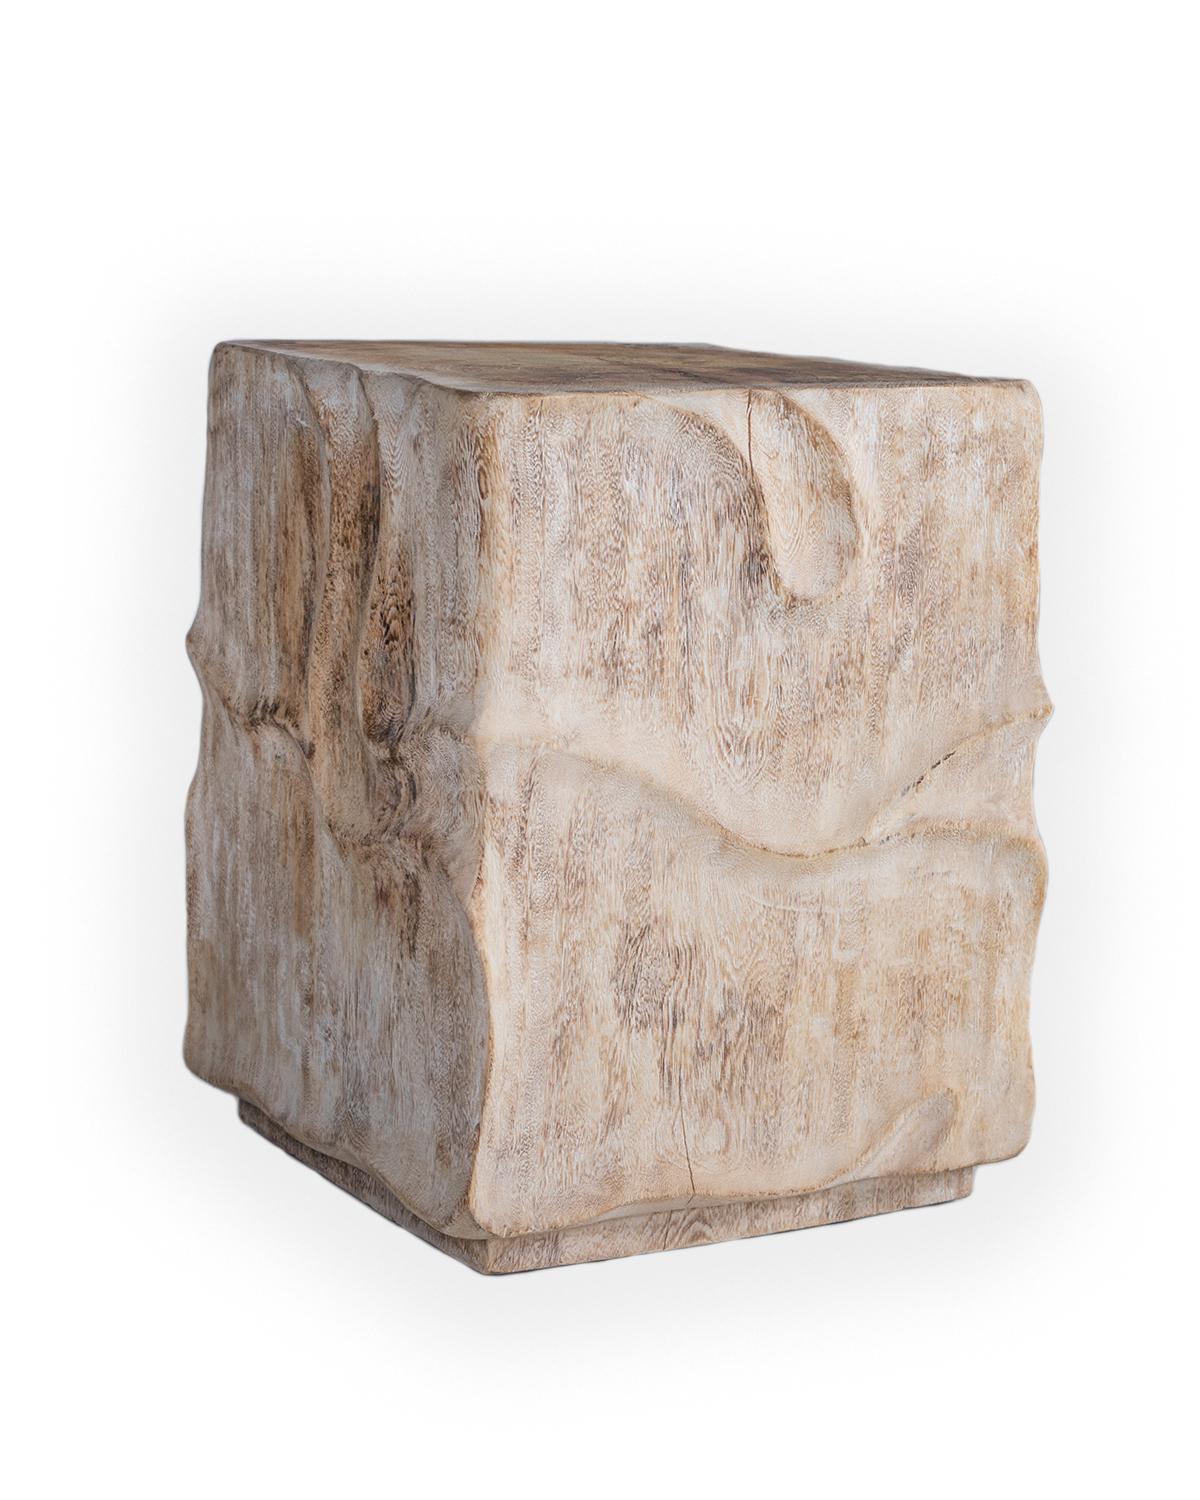 Contemporary form mango wood side table. 

Part of our one of a kind Le Monde collection. Exclusive to Brendan Bass.